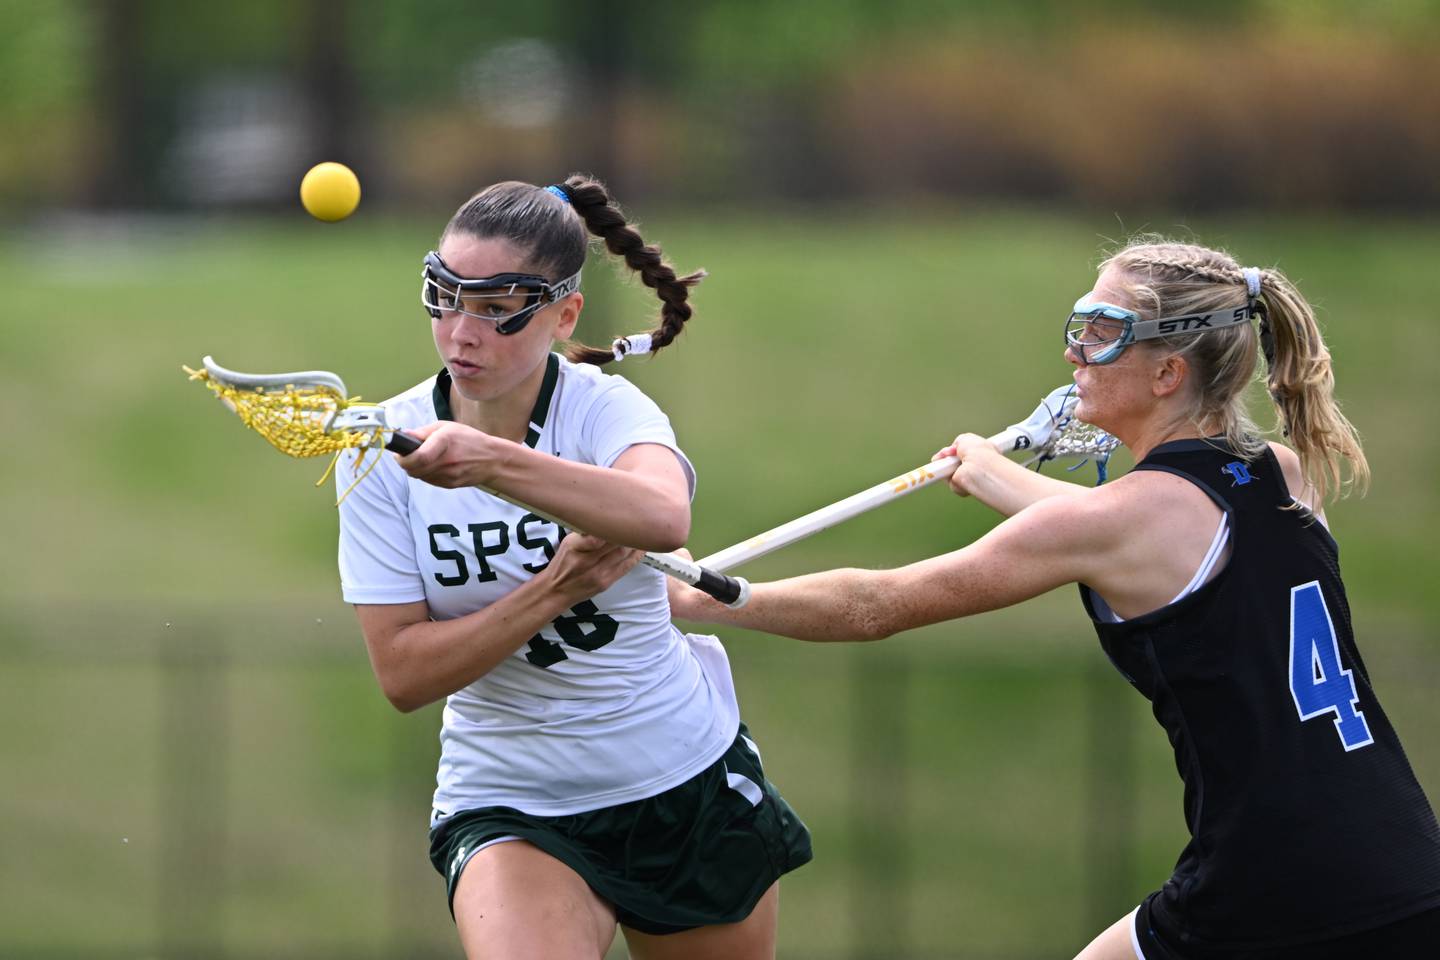 St. Pauls’ Julia Lee and Darien’s Kelly Holmes attack a loose ball in the first half of a lacrosse game Saturday, April 15, 2023, in Sparks Glencoe, MD.